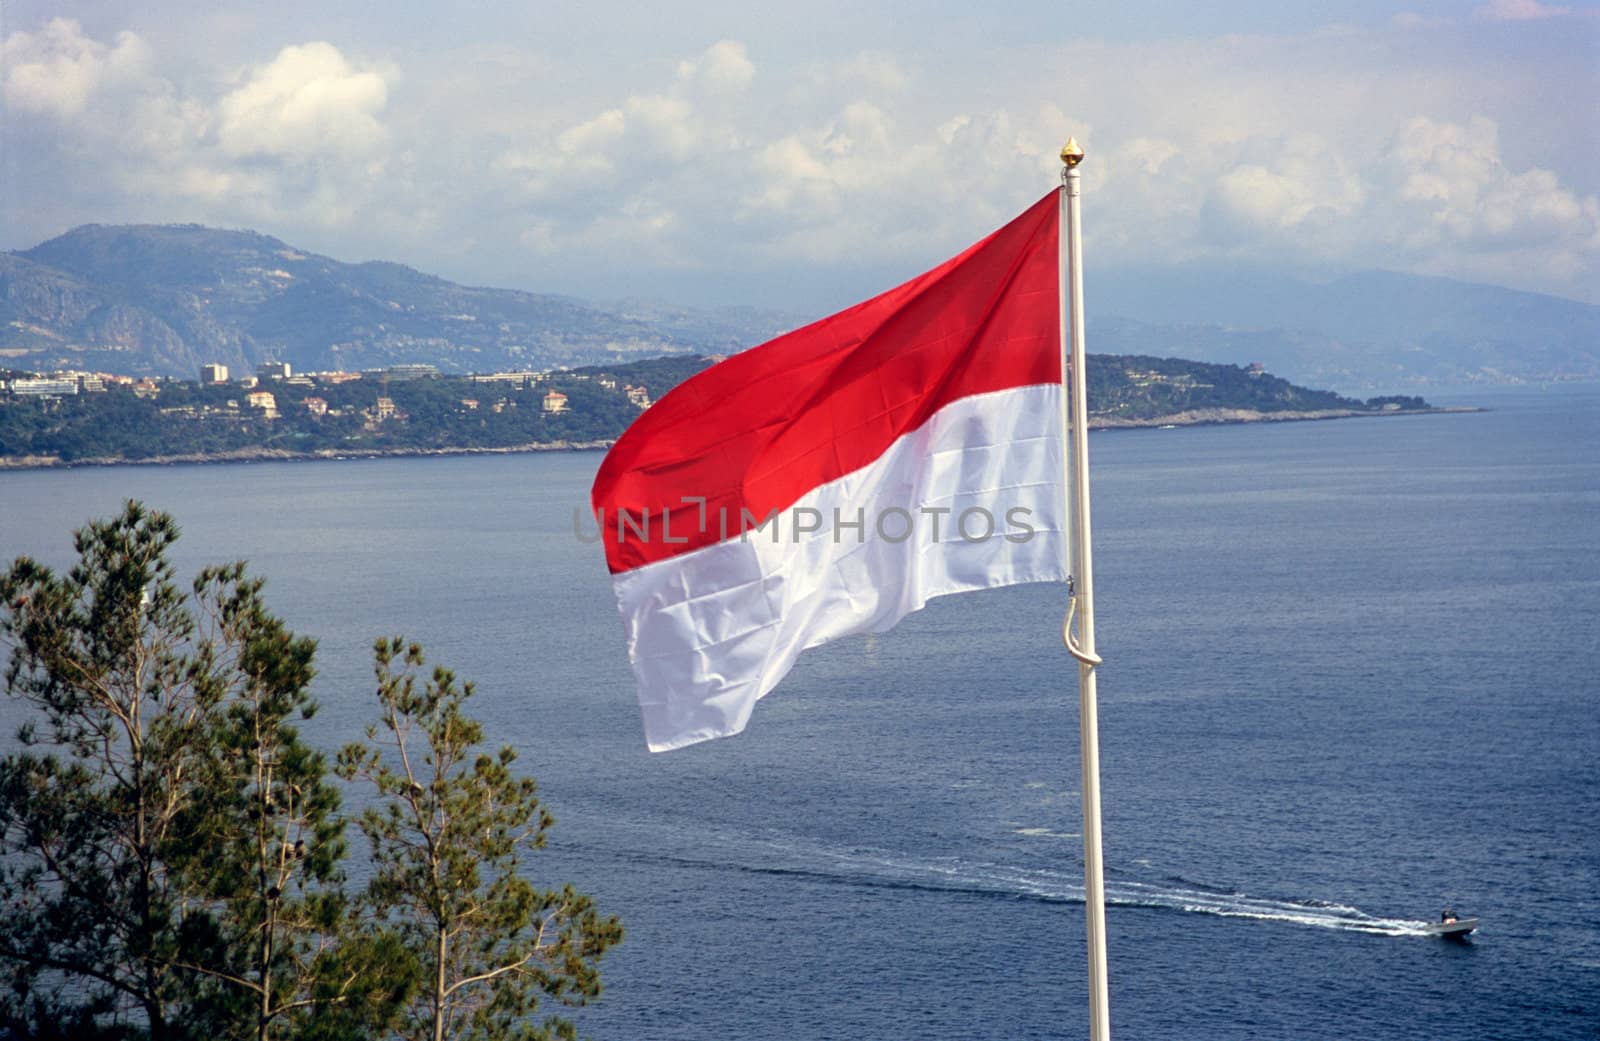 The flag of the principality of Monaco flying over the Mediterranean sea.